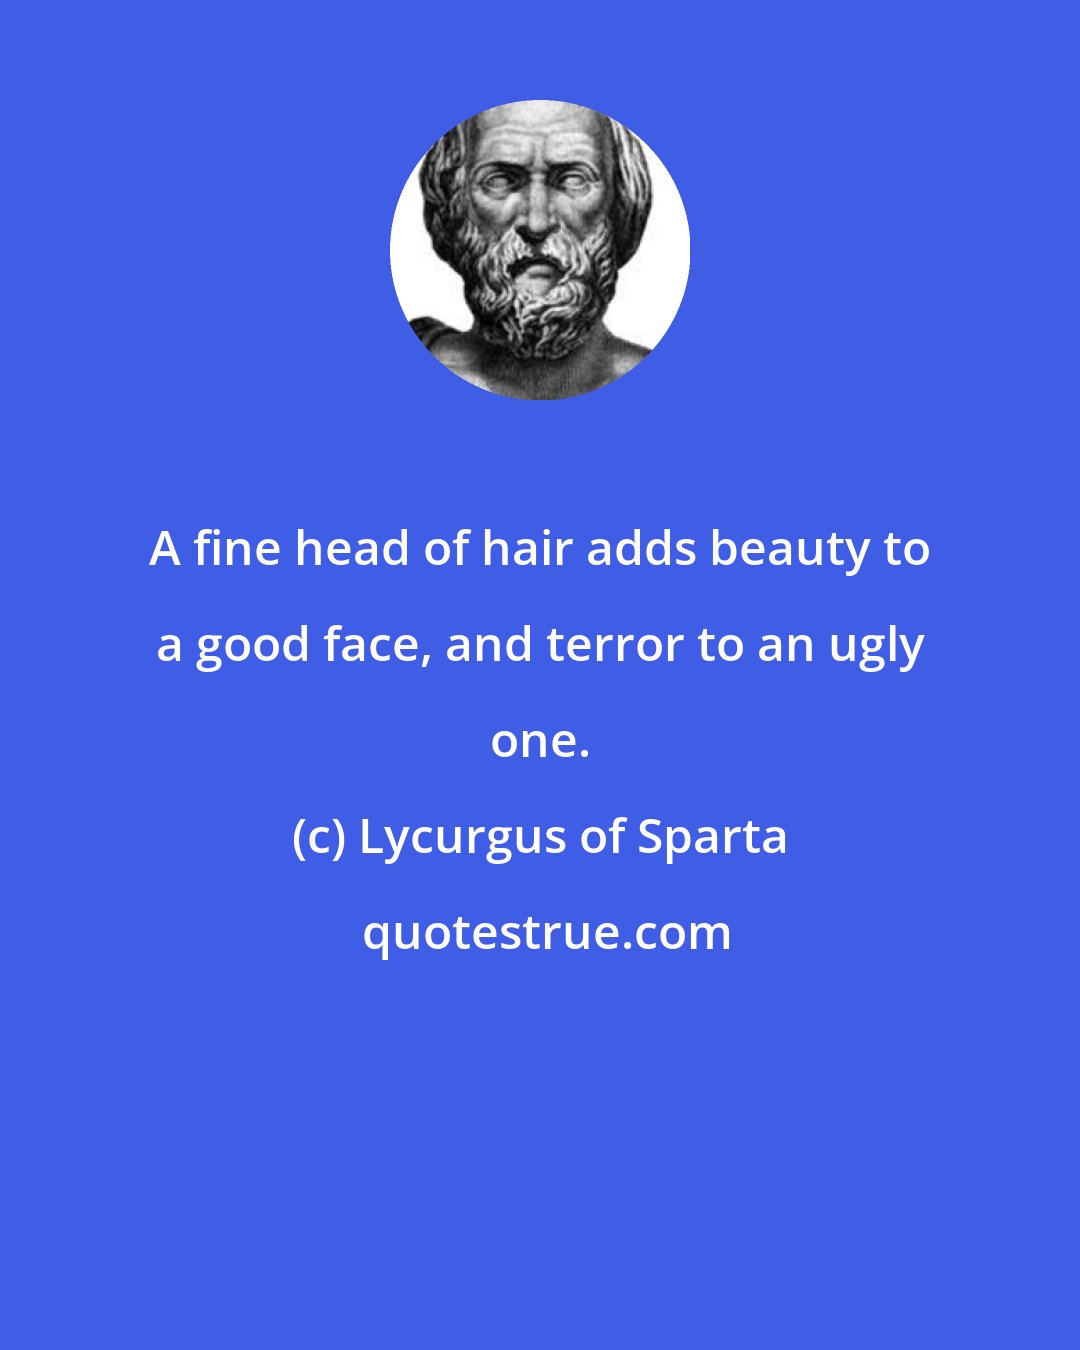 Lycurgus of Sparta: A fine head of hair adds beauty to a good face, and terror to an ugly one.